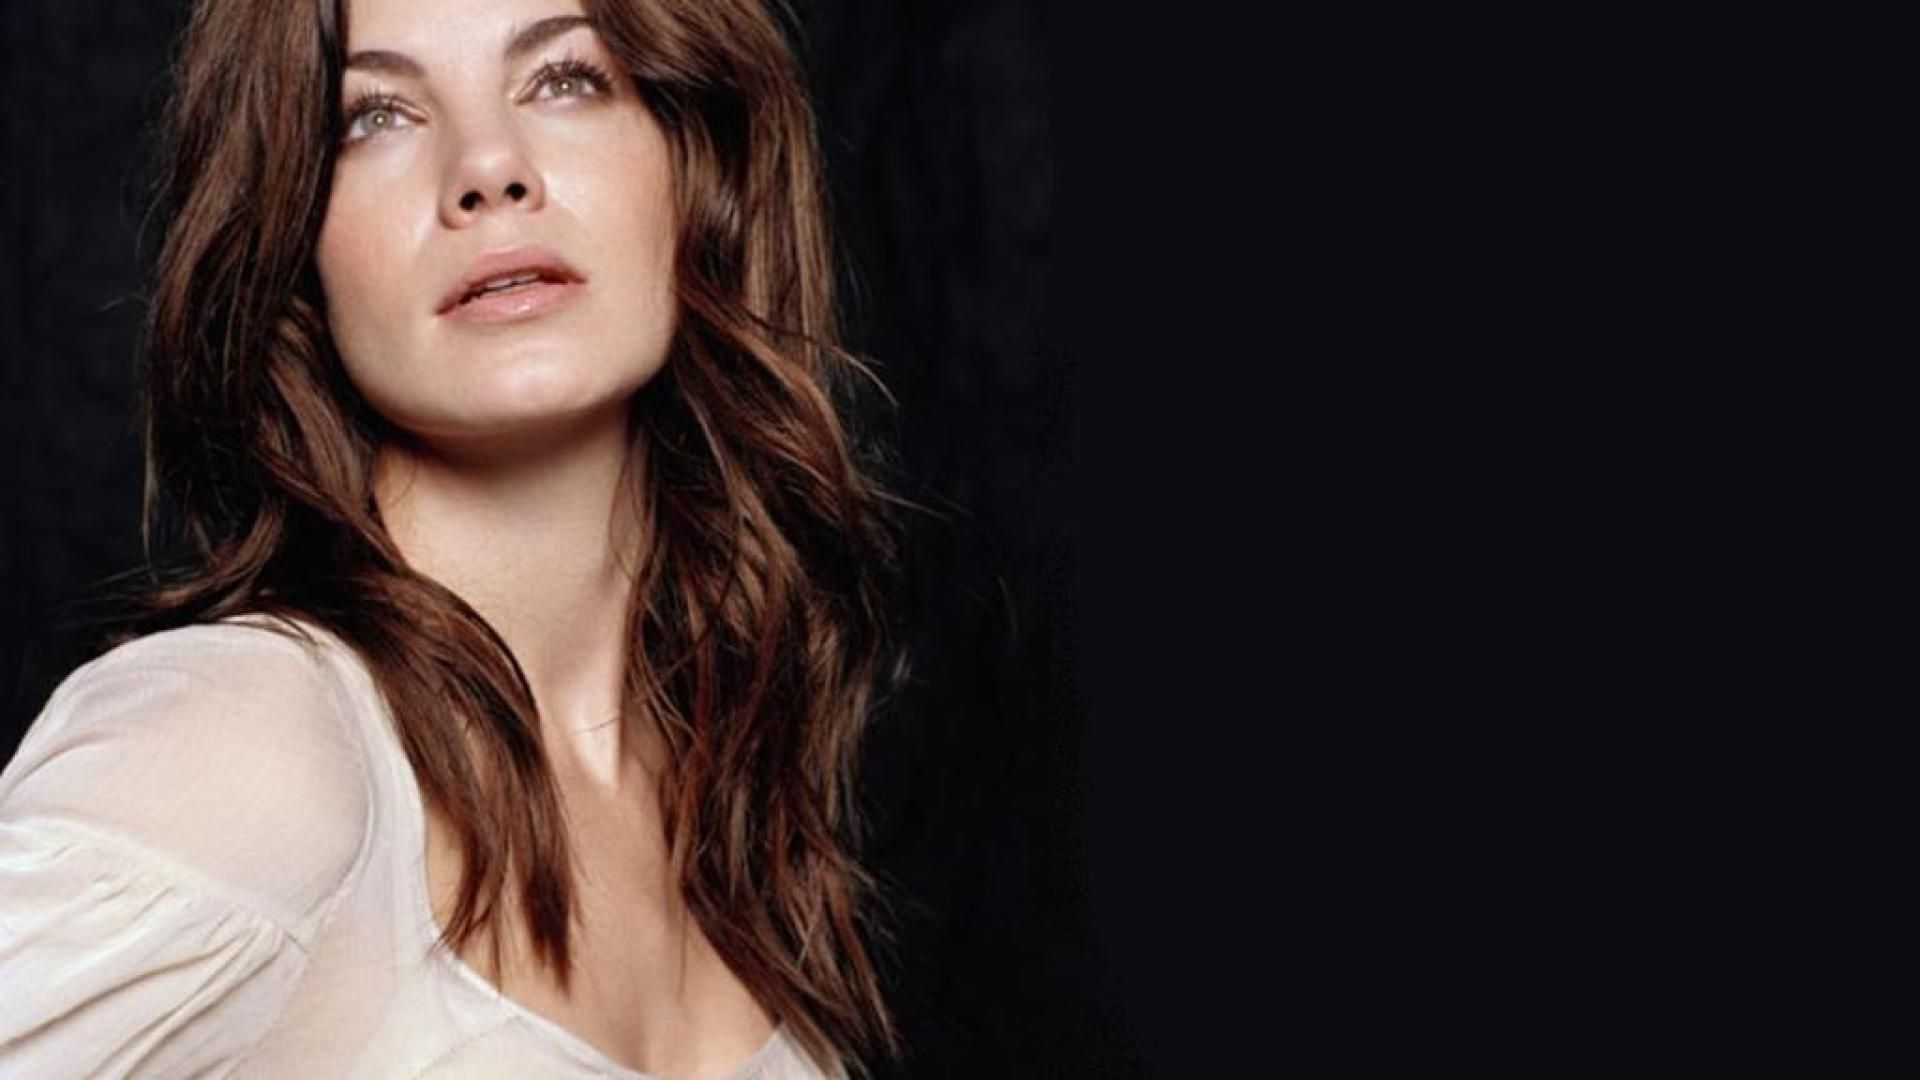 Michelle monaghan - (#95487) - High Quality and Resolution ...